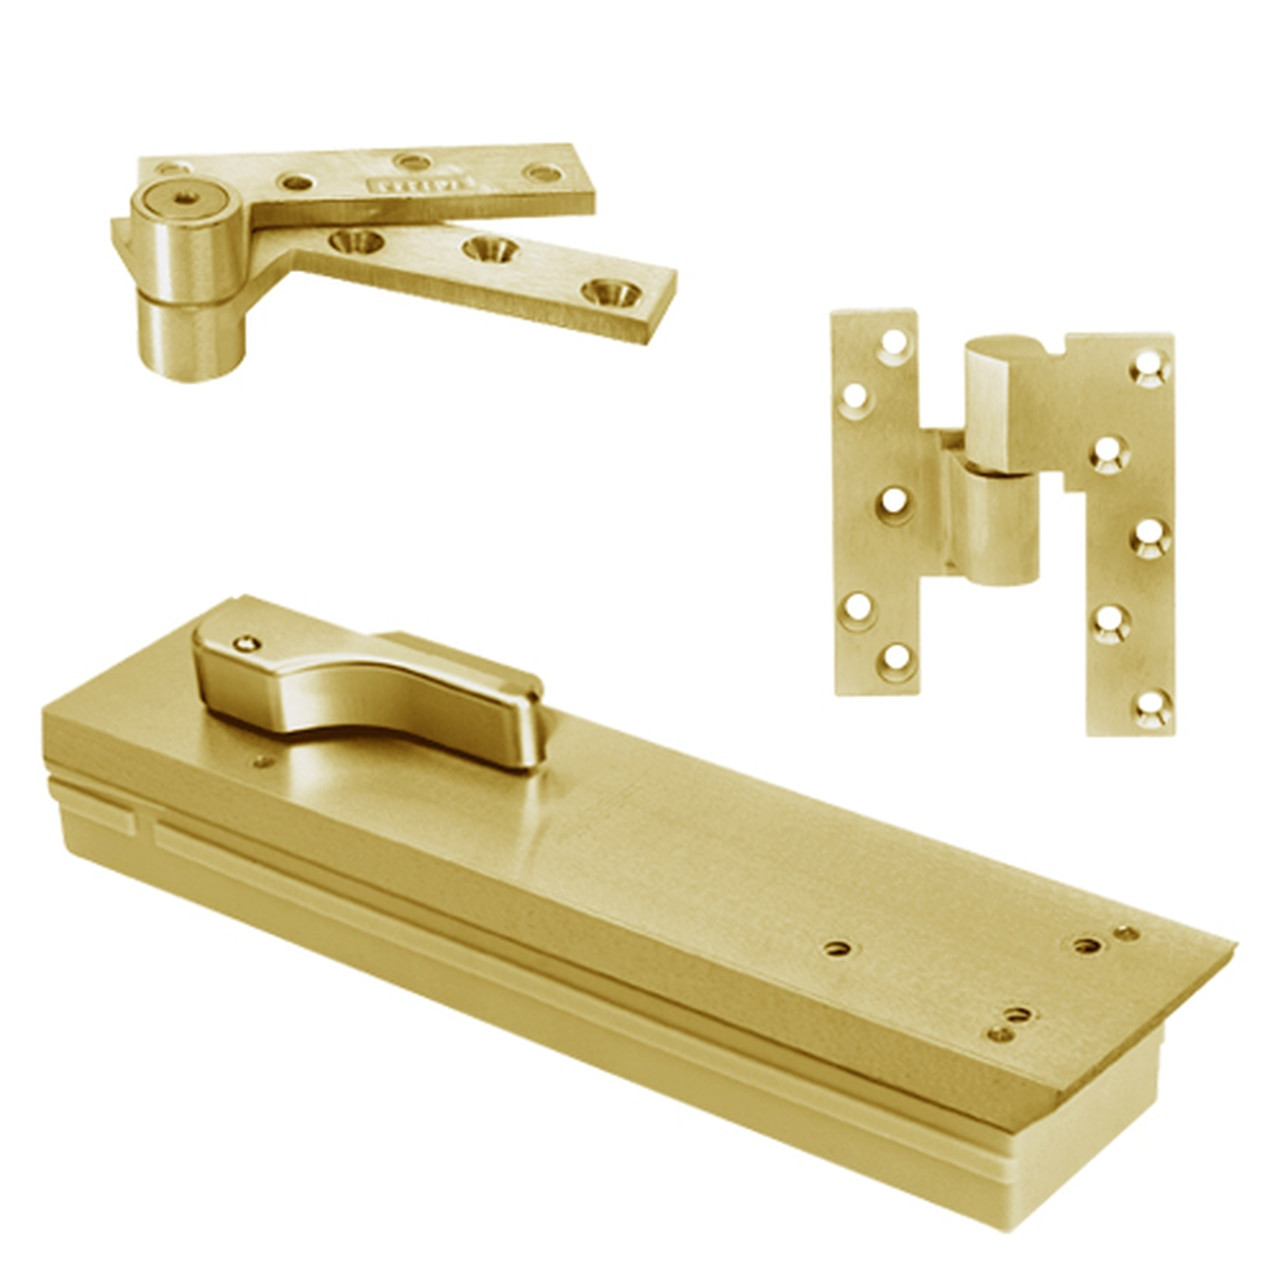 FQ5104NBC-LFP-LCC-LH-606 Rixson Q51 Series Fire Rated 3/4" Offset Hung Shallow Depth Floor Closers in Satin Brass Finish